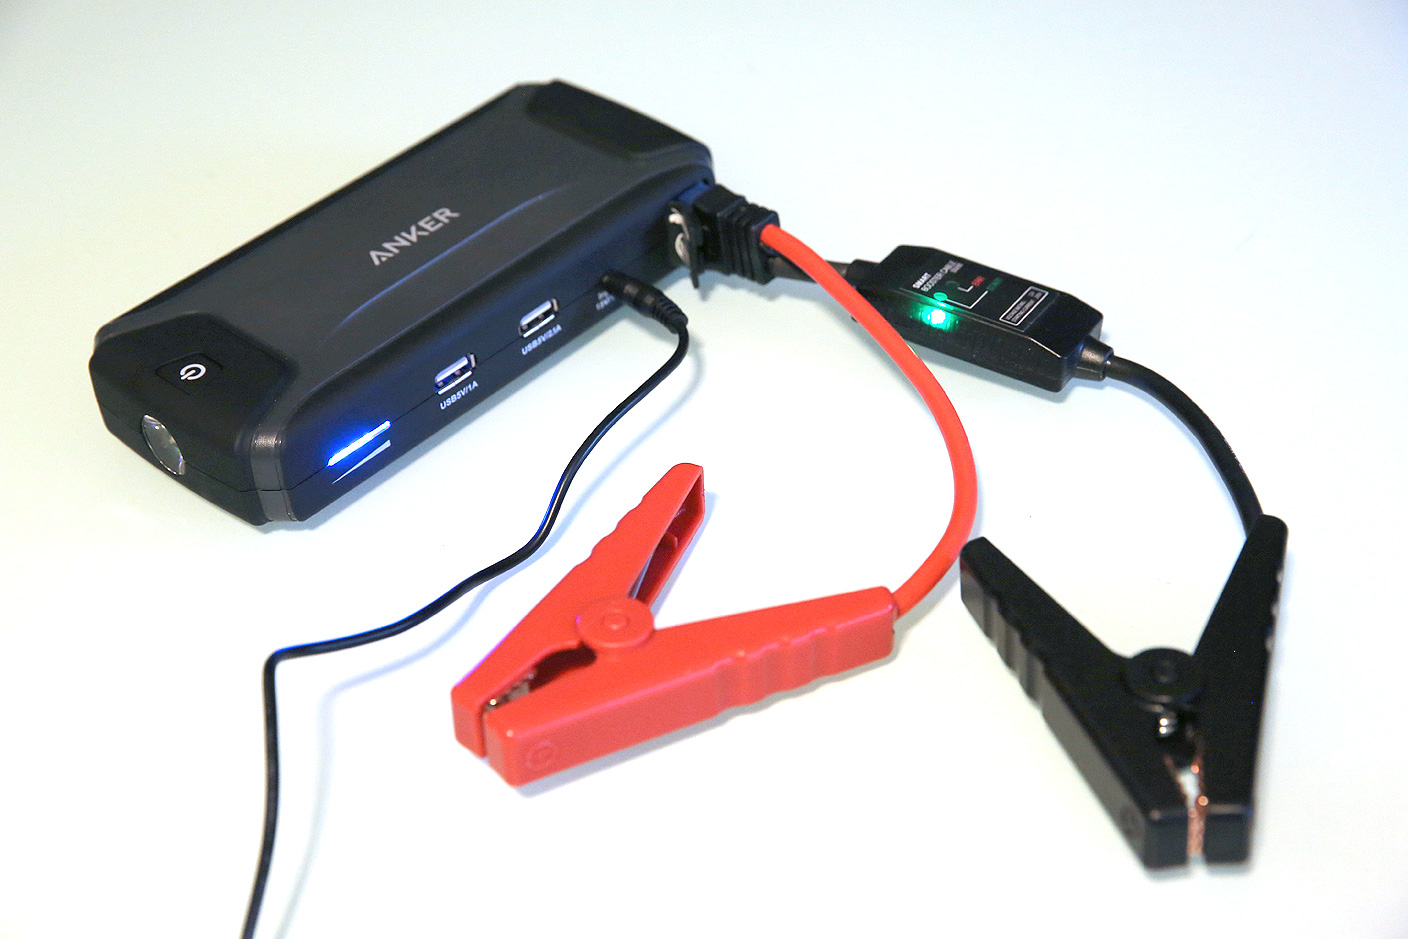 Portable Jump Starter vs Battery Charger: what's the difference